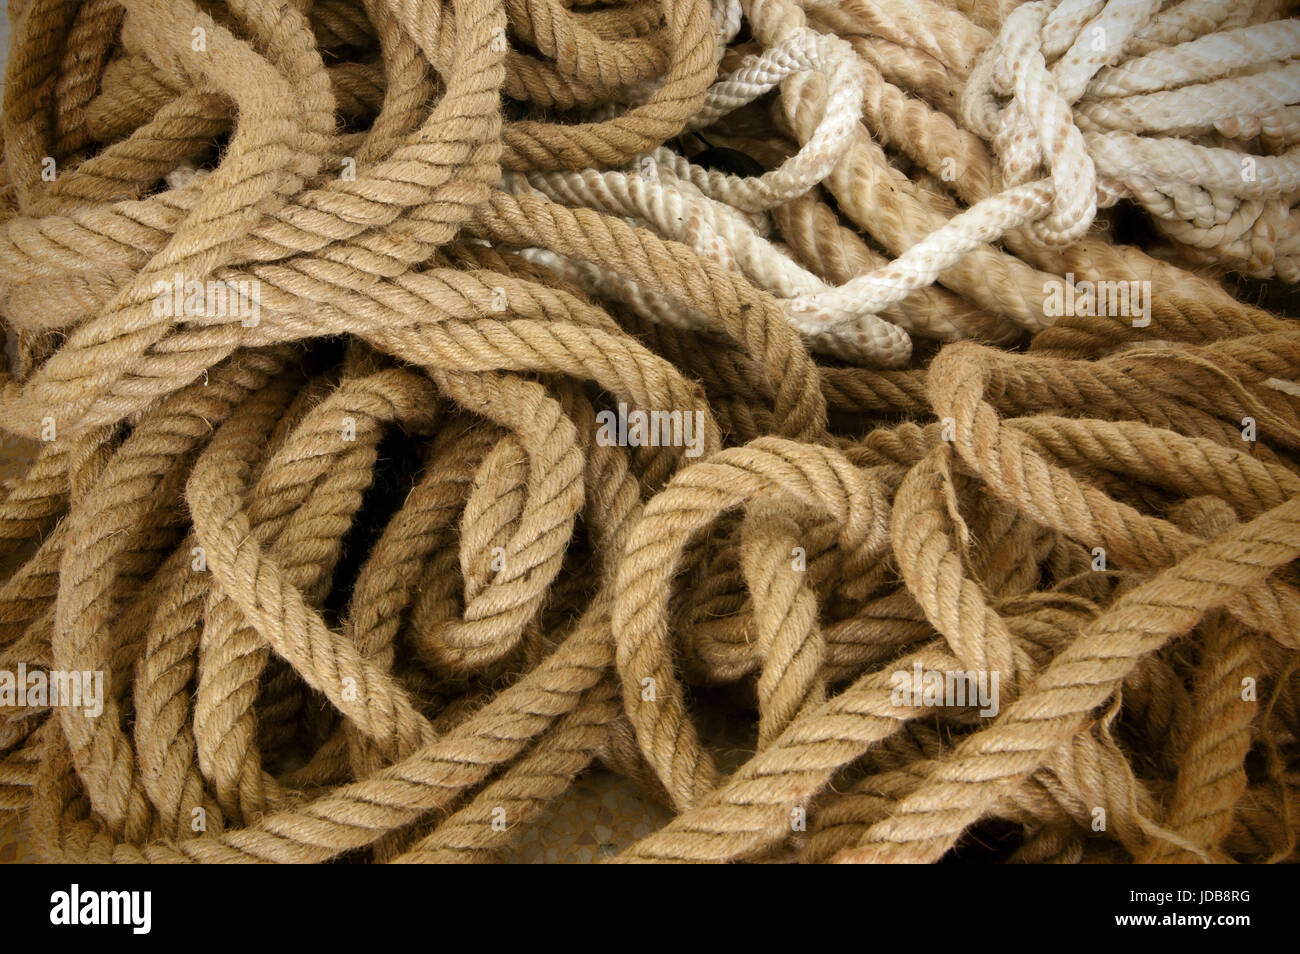 A pile of old hemp rope Stock Photo - Alamy